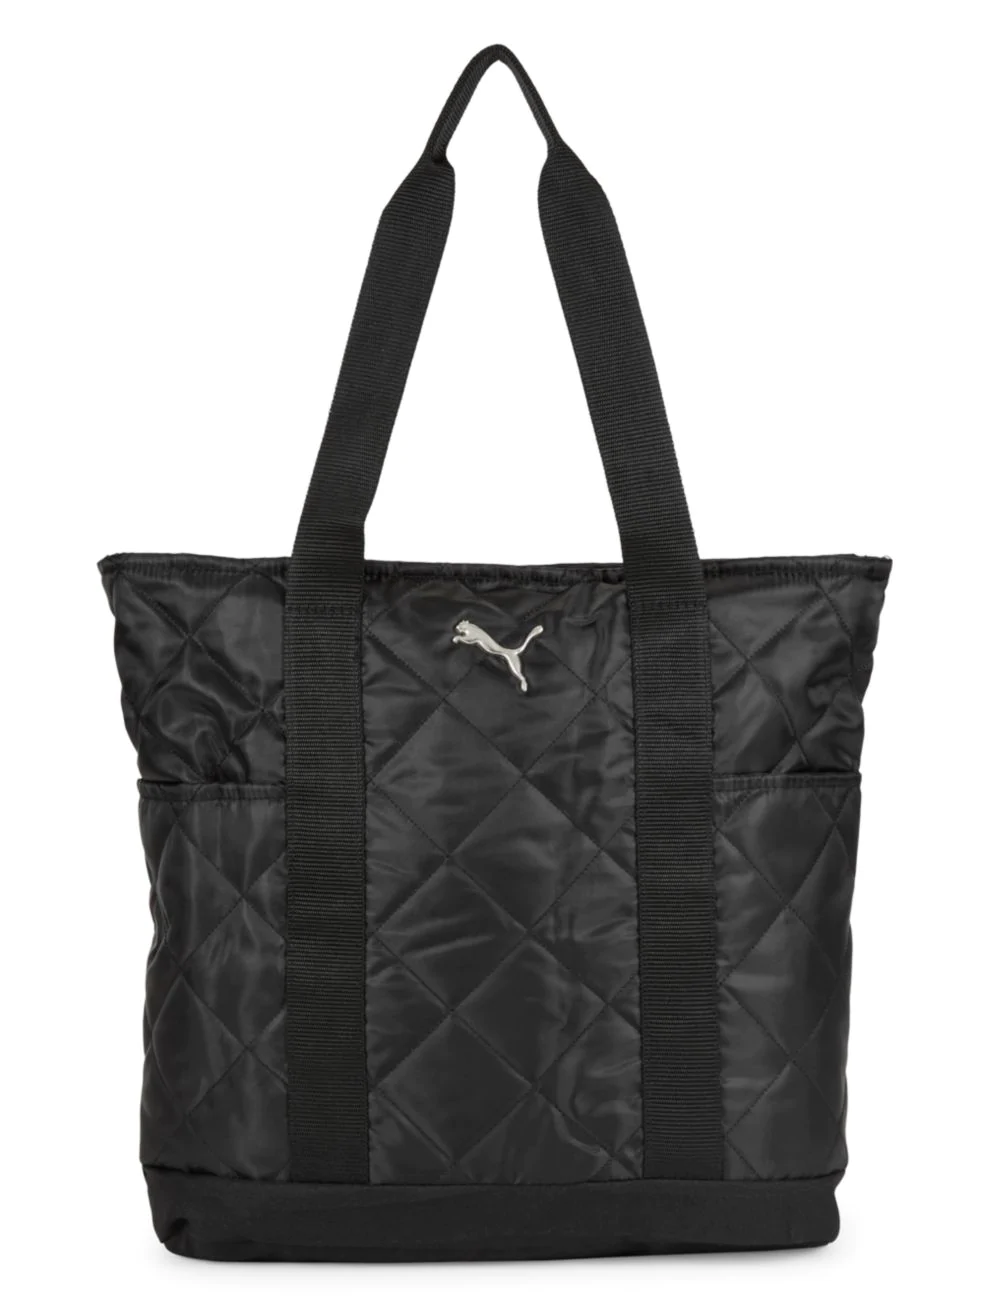 9 quilted gym bags that will add glam to your activewear look